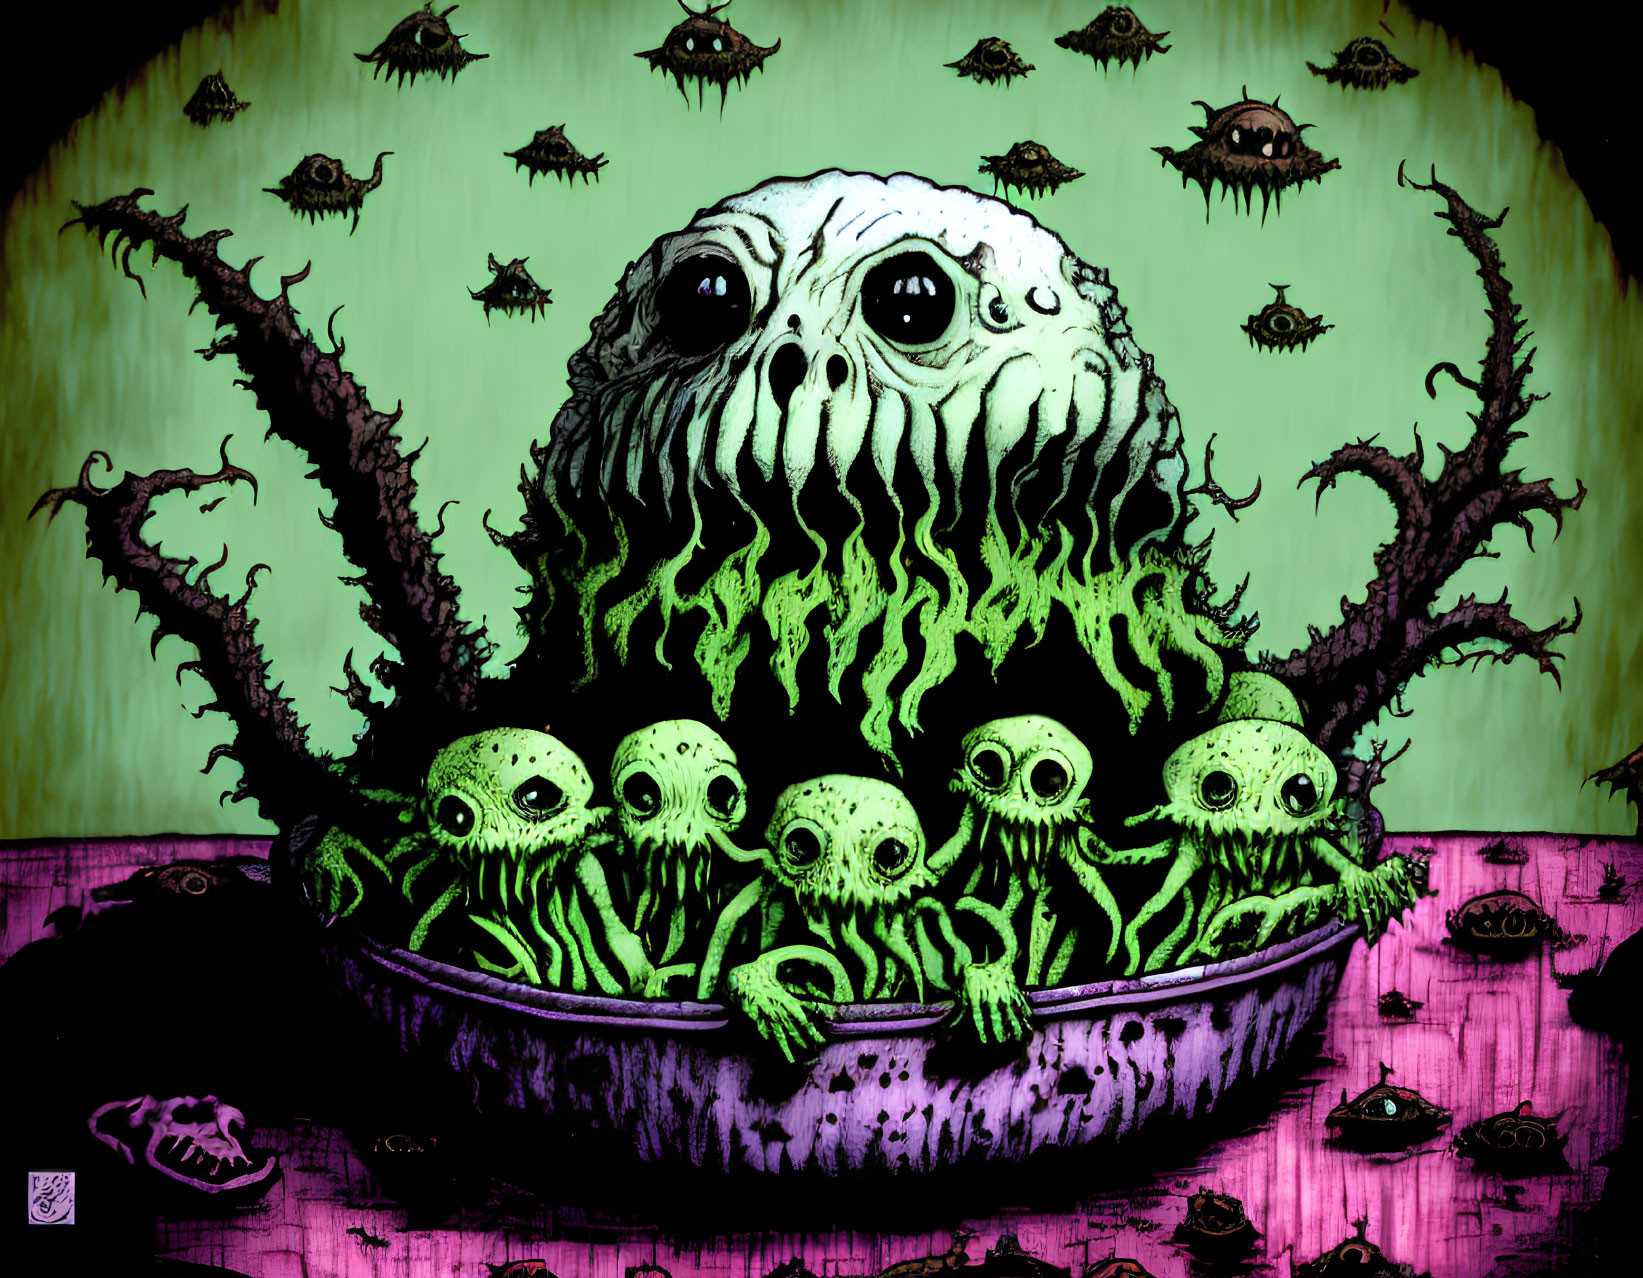 Large central monster with multiple eyes and tentacles, surrounded by smaller creatures in greenish hue.